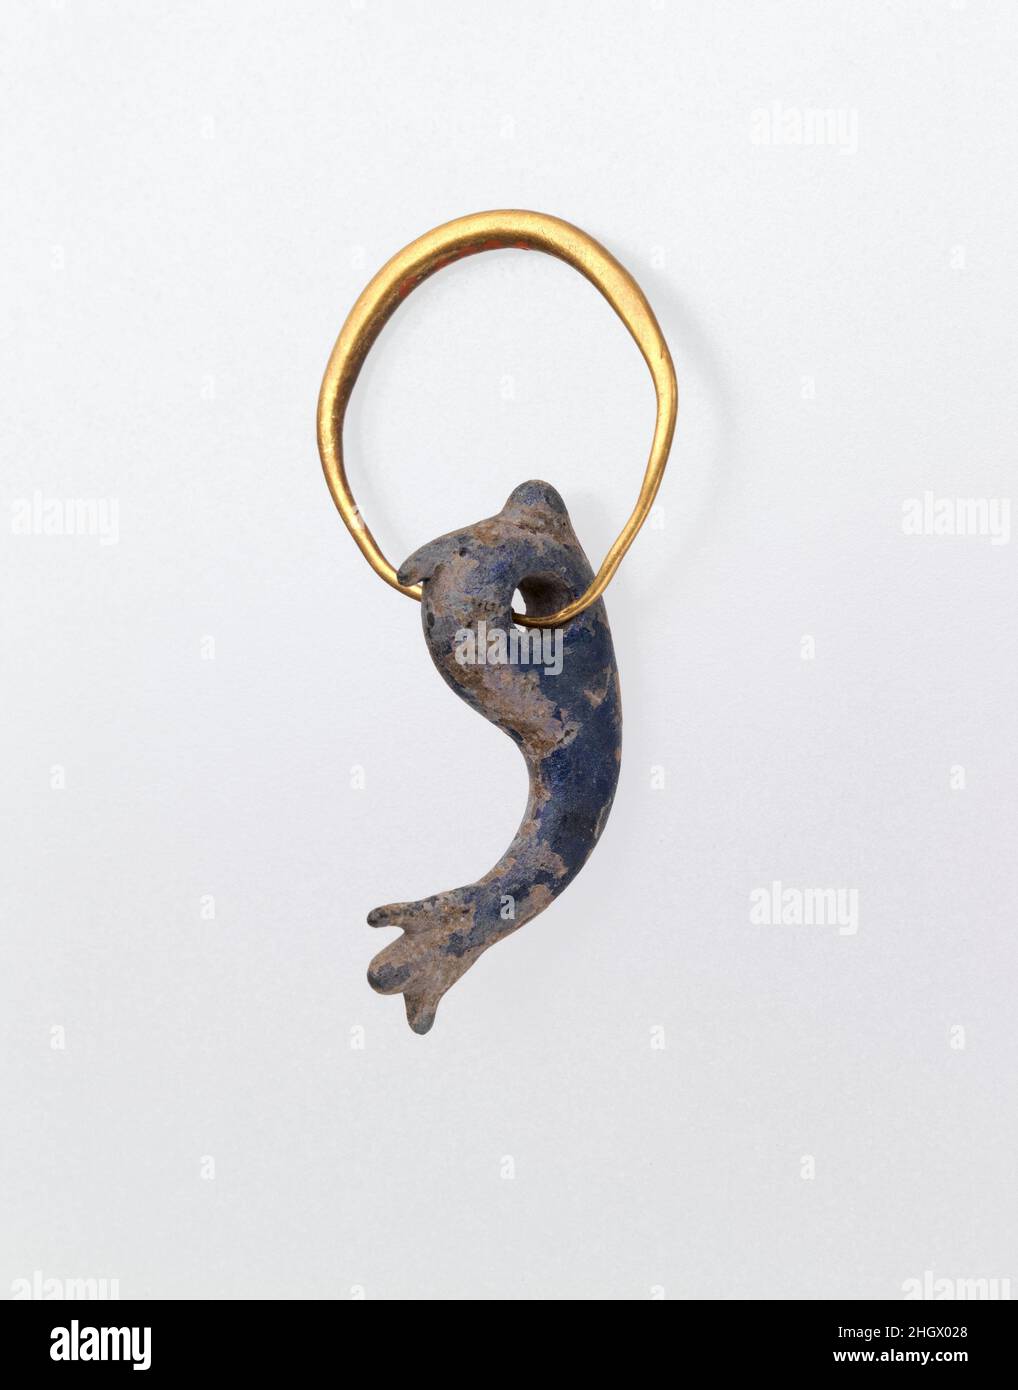 Gold earring with glass pendant in the form of a dolphin possibly 3rd–5th century A.D. Roman Glass pendant:Translucent cobalt blue.Shaped as a dolphin in the round, with large suspension hole serving as eyes, tooled to form rounded nose, pointed crest, and three-finned tail; small jagged projection under belly.Intact; dulling, blackish weathering, and iridescence.. Gold earring with glass pendant in the form of a dolphin. Roman. possibly 3rd–5th century A.D.. Gold, glass; tooled and rod-pierced. Late Imperial Stock Photo